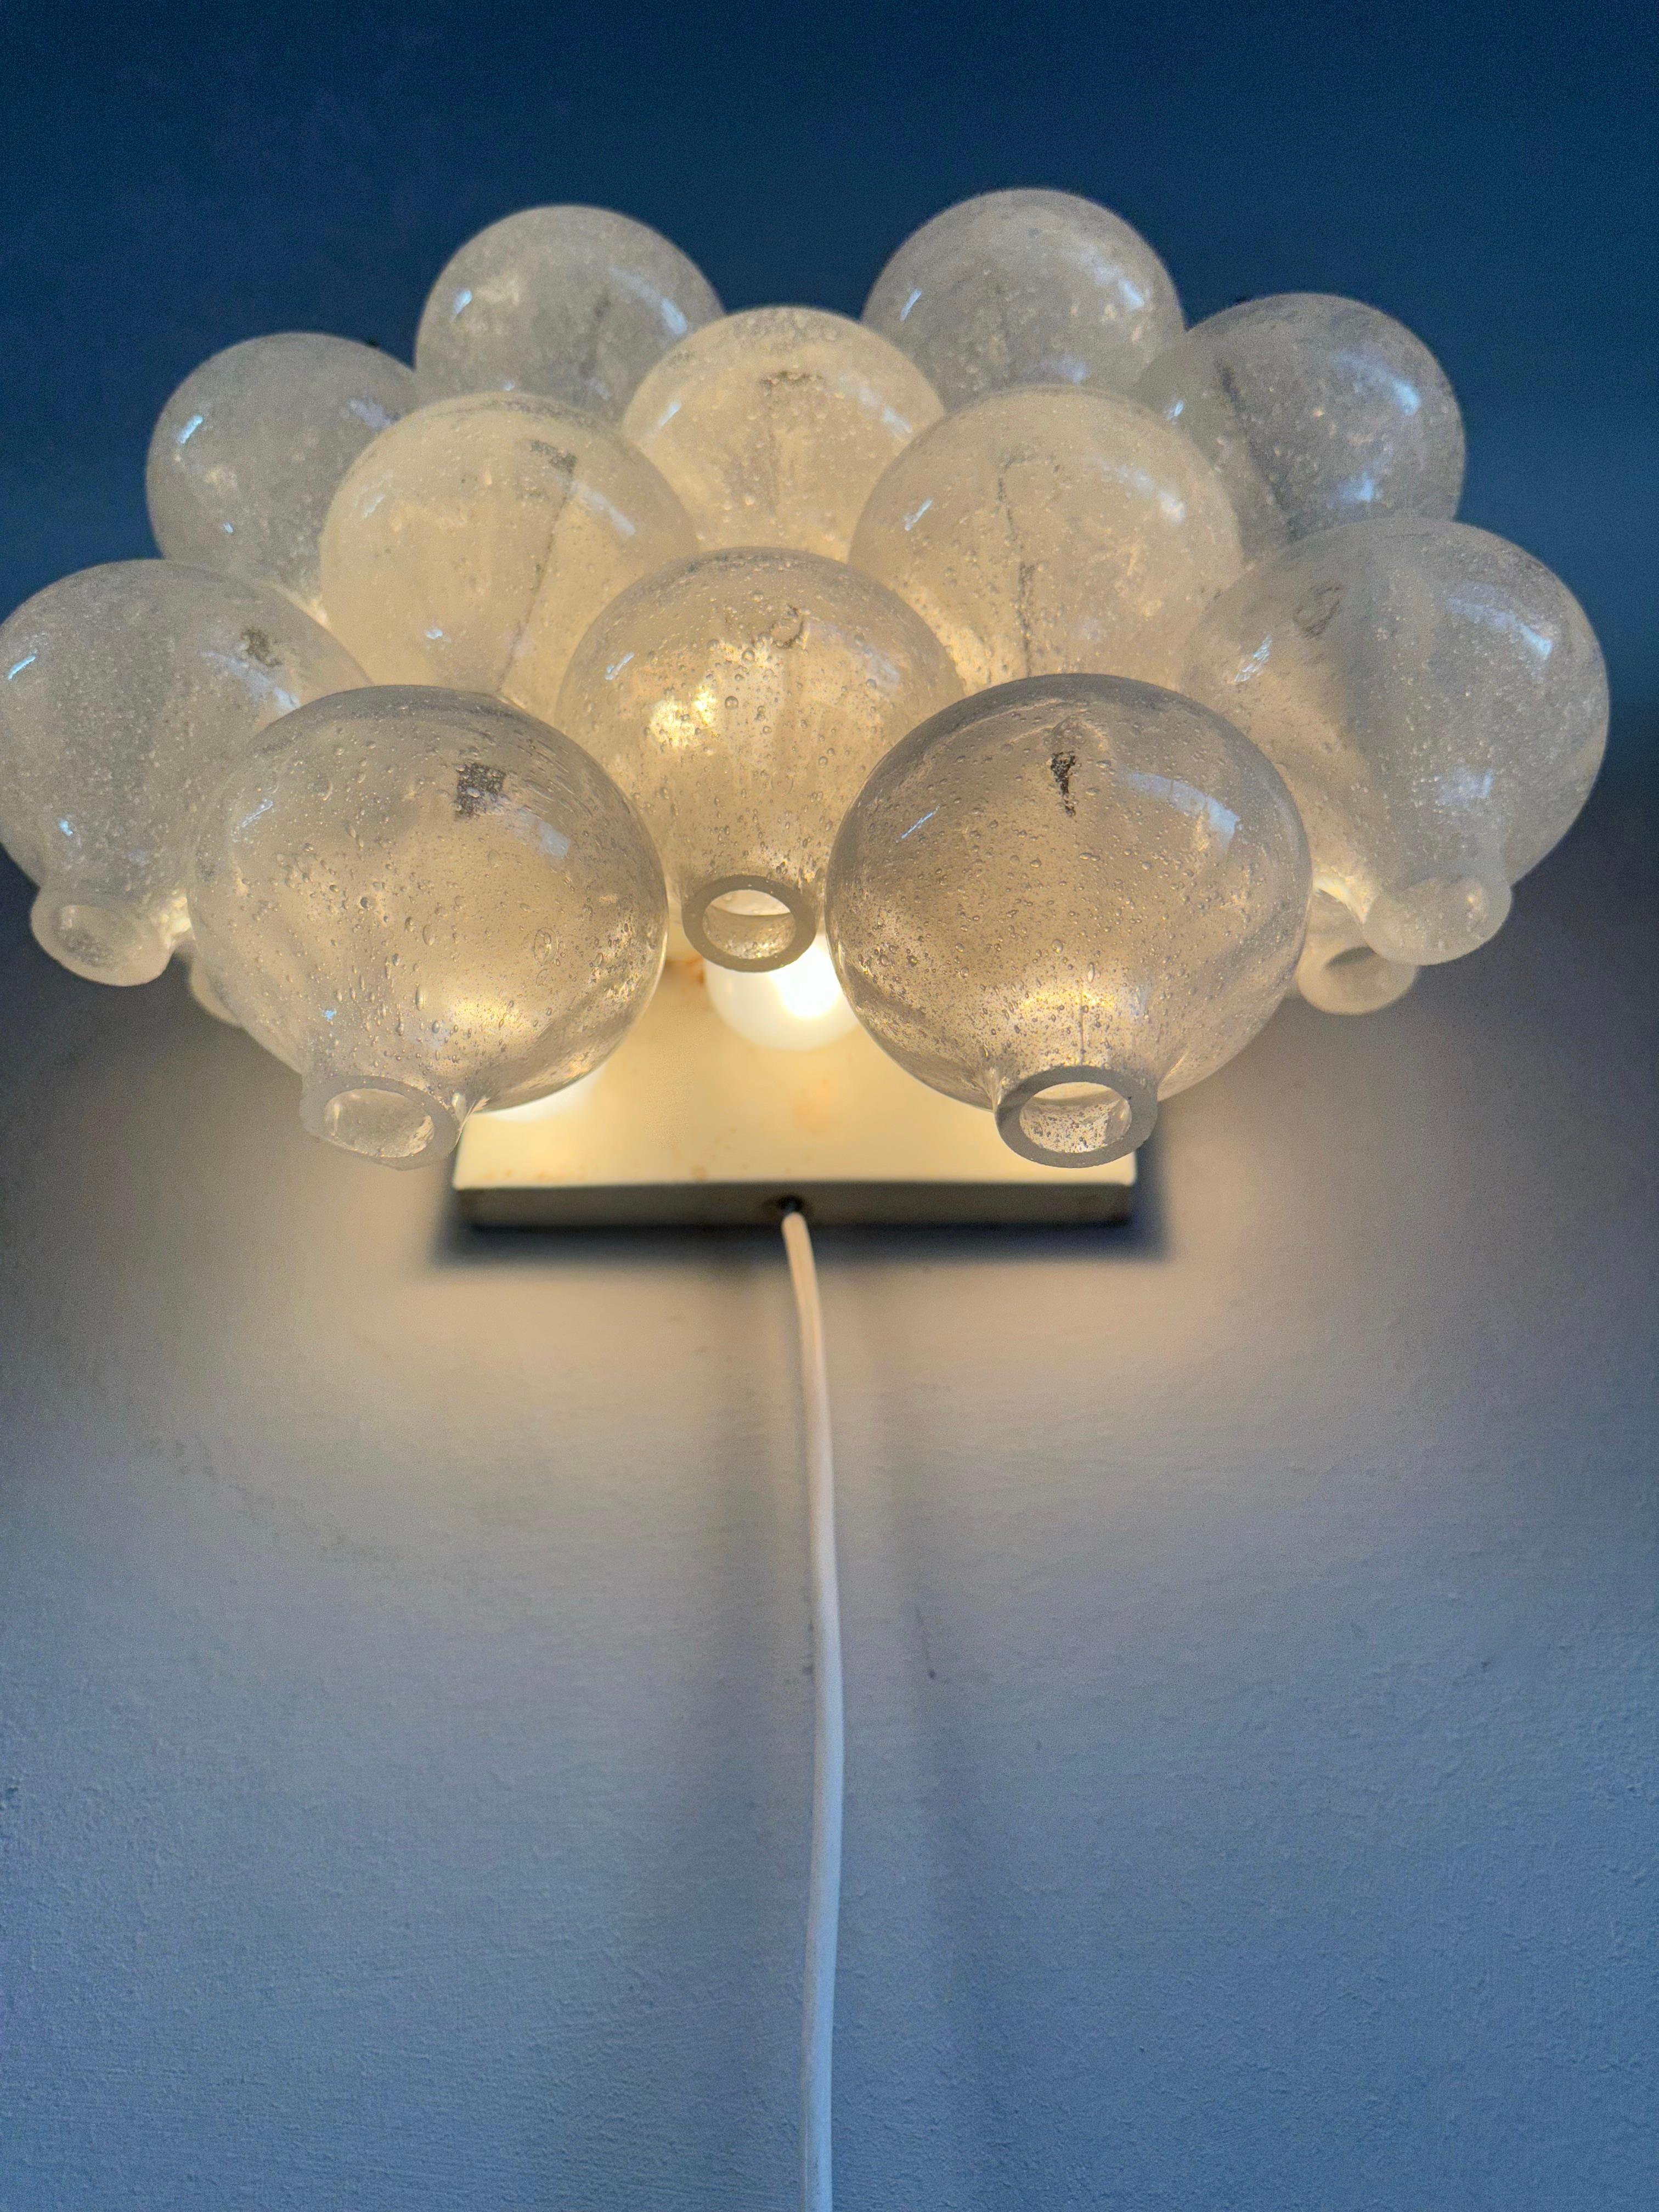 Pair of MidCentury Modern Tulipan Glass Wall Lights Sconces Lamps by Kalmar 1970 For Sale 2